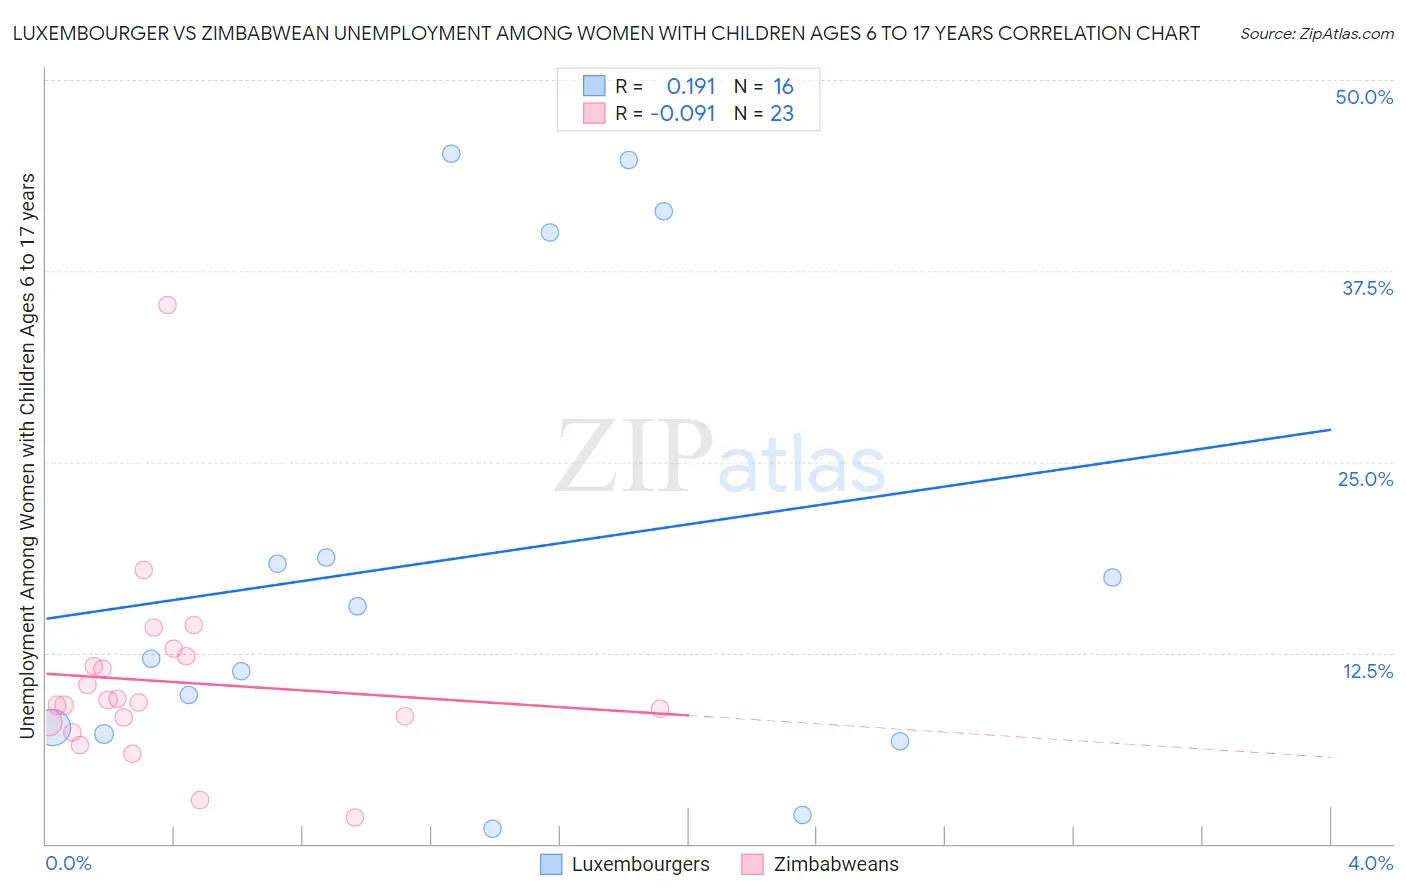 Luxembourger vs Zimbabwean Unemployment Among Women with Children Ages 6 to 17 years